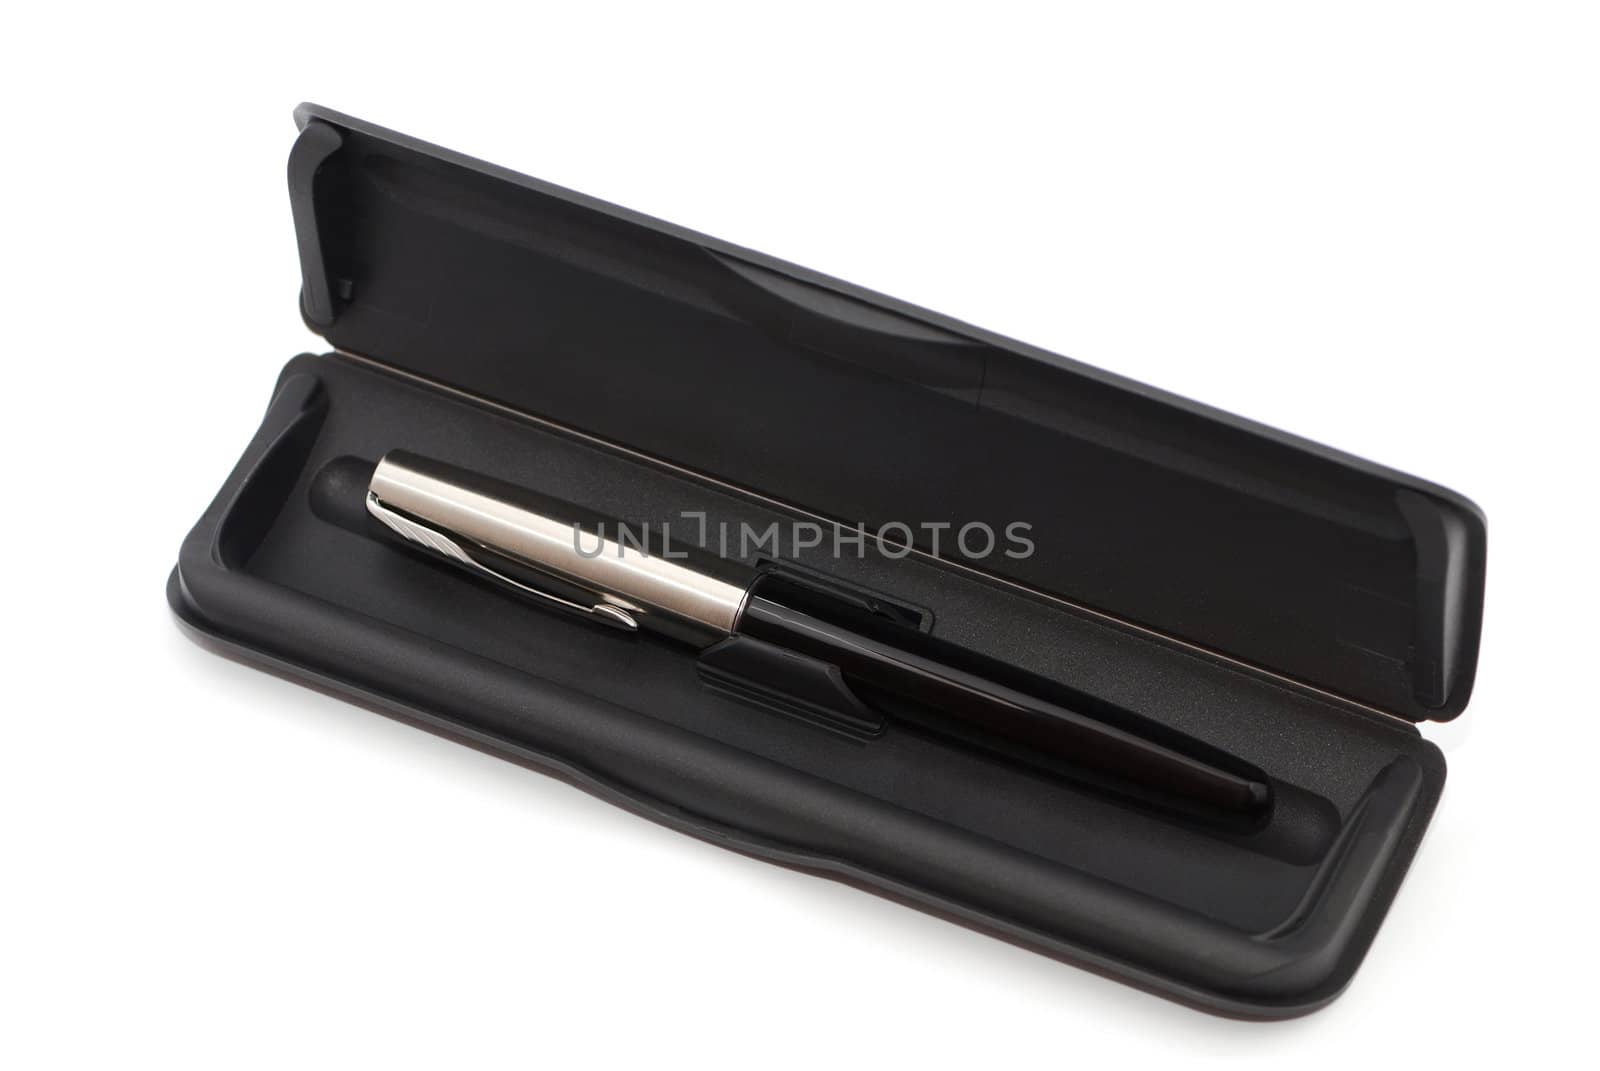 Fountain pen in a box isolated on white